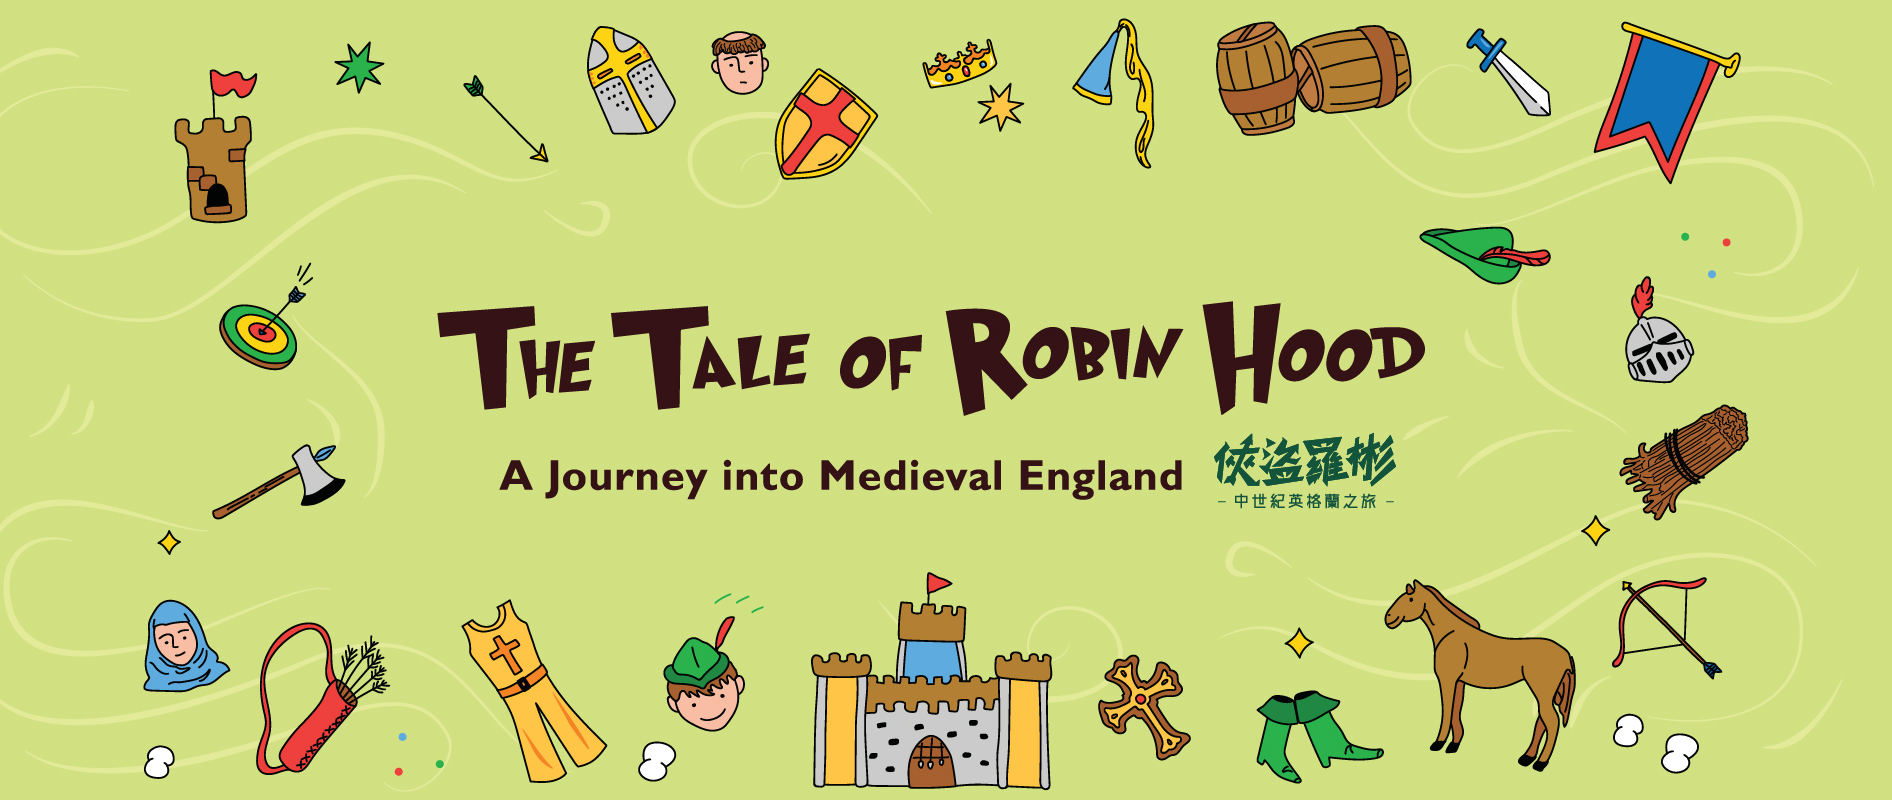 The Tale of Robin Hood: A Journey into Medieval England